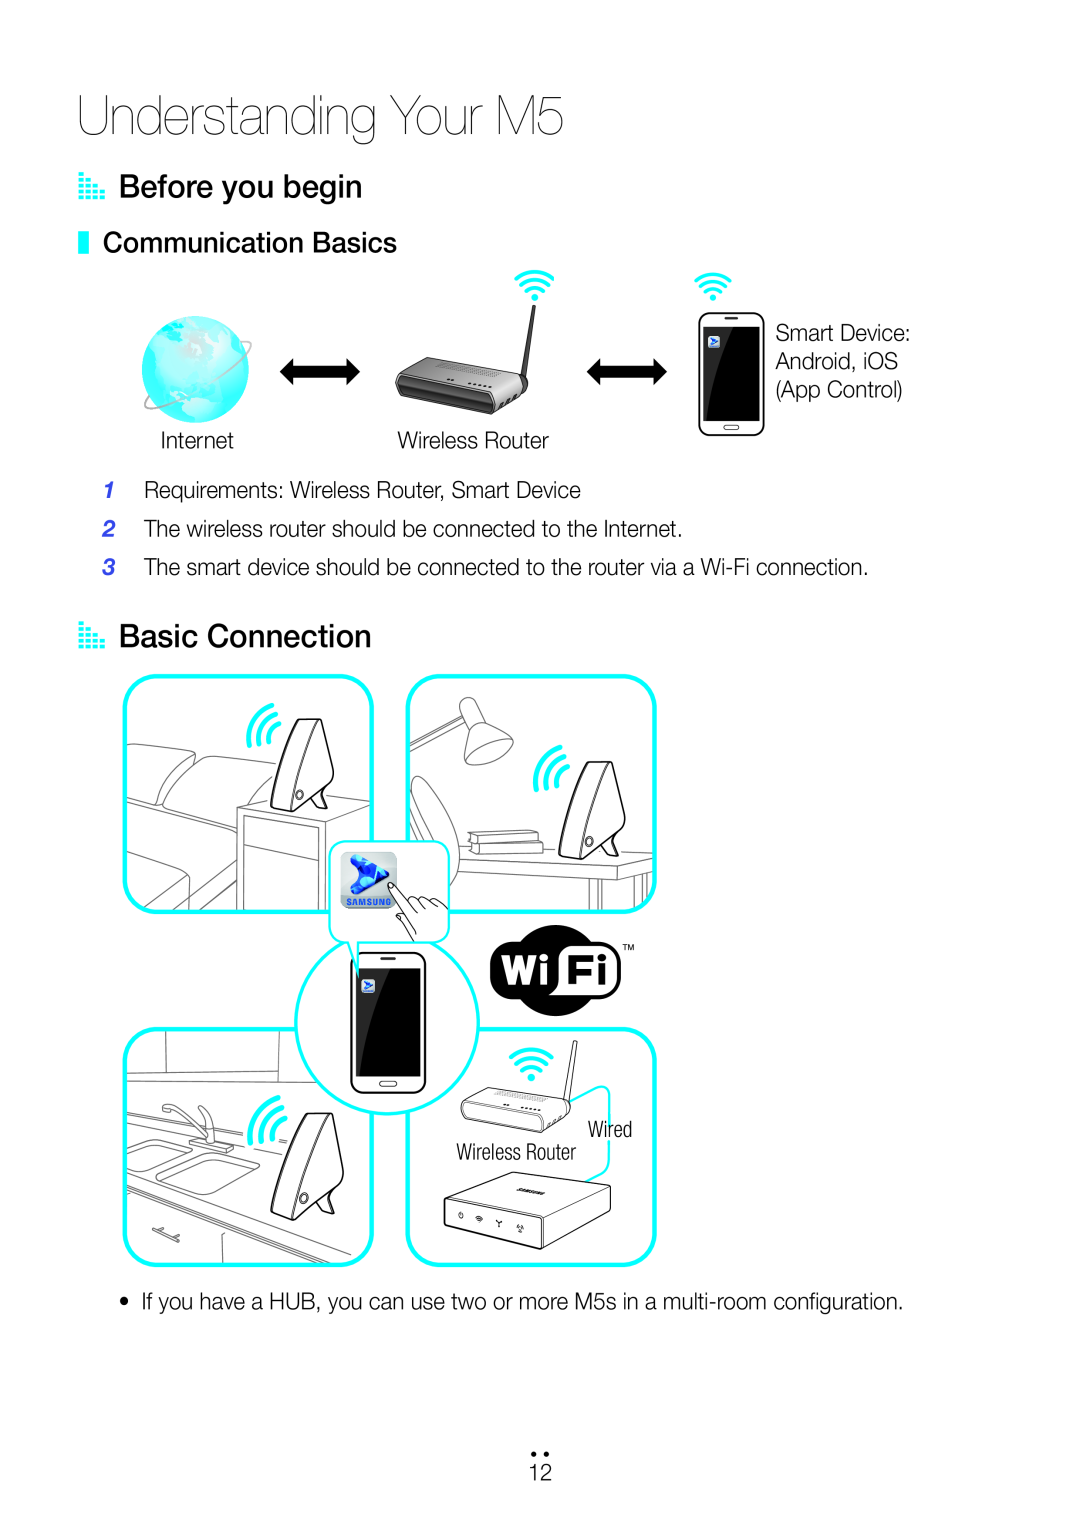 Samsung user manual Understanding Your M5, AA Before you begin, AA Basic Connection, Communication Basics 